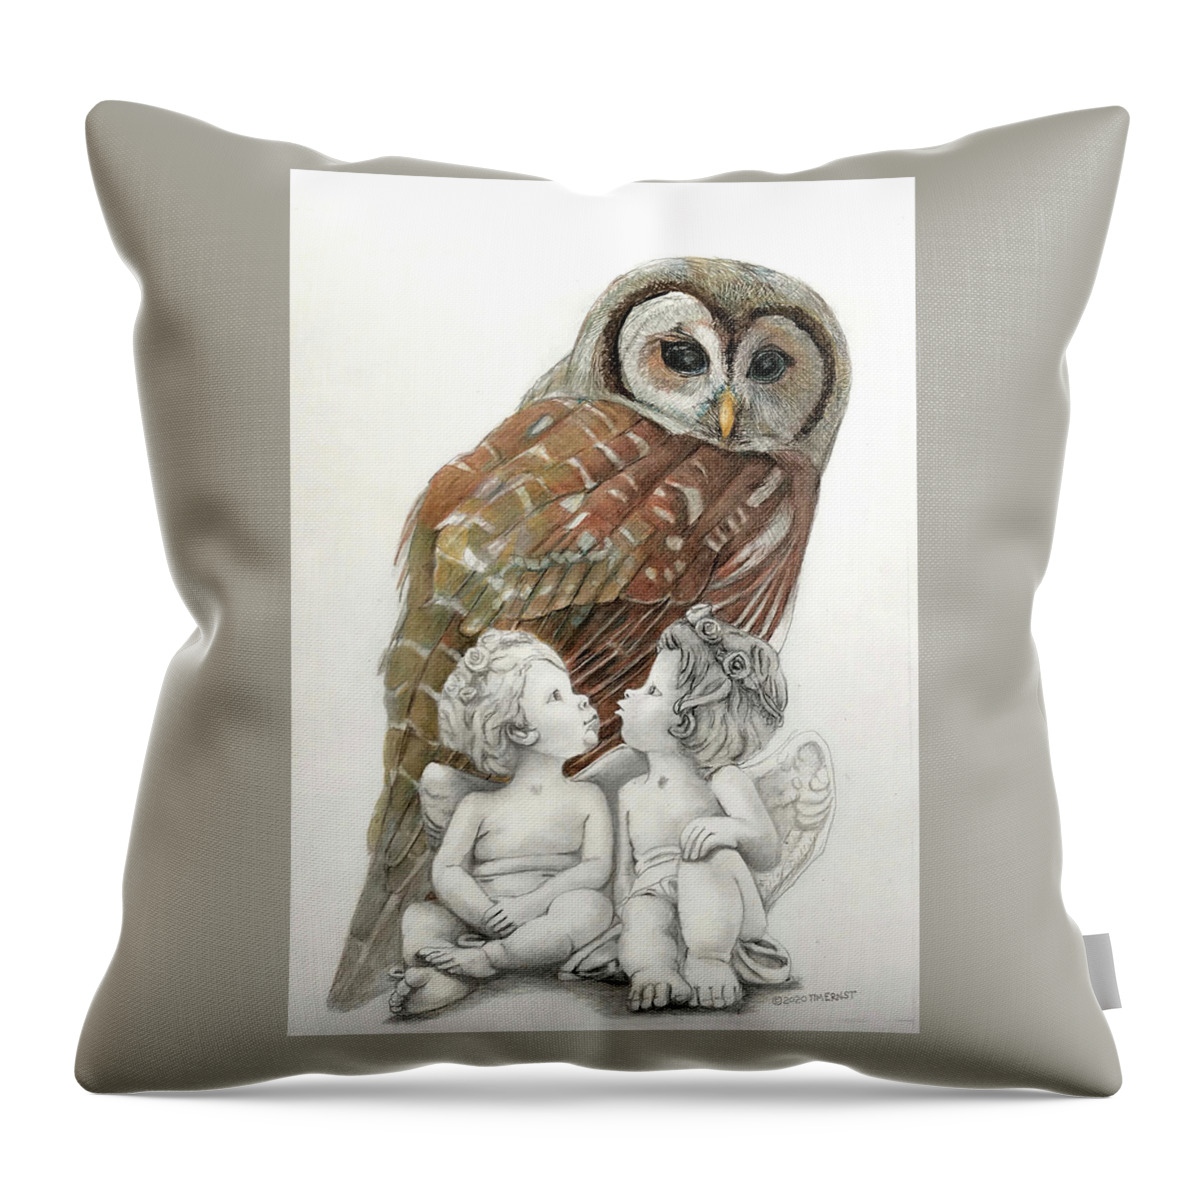 Prey Throw Pillow featuring the drawing The Owl-guardian or predator by Tim Ernst